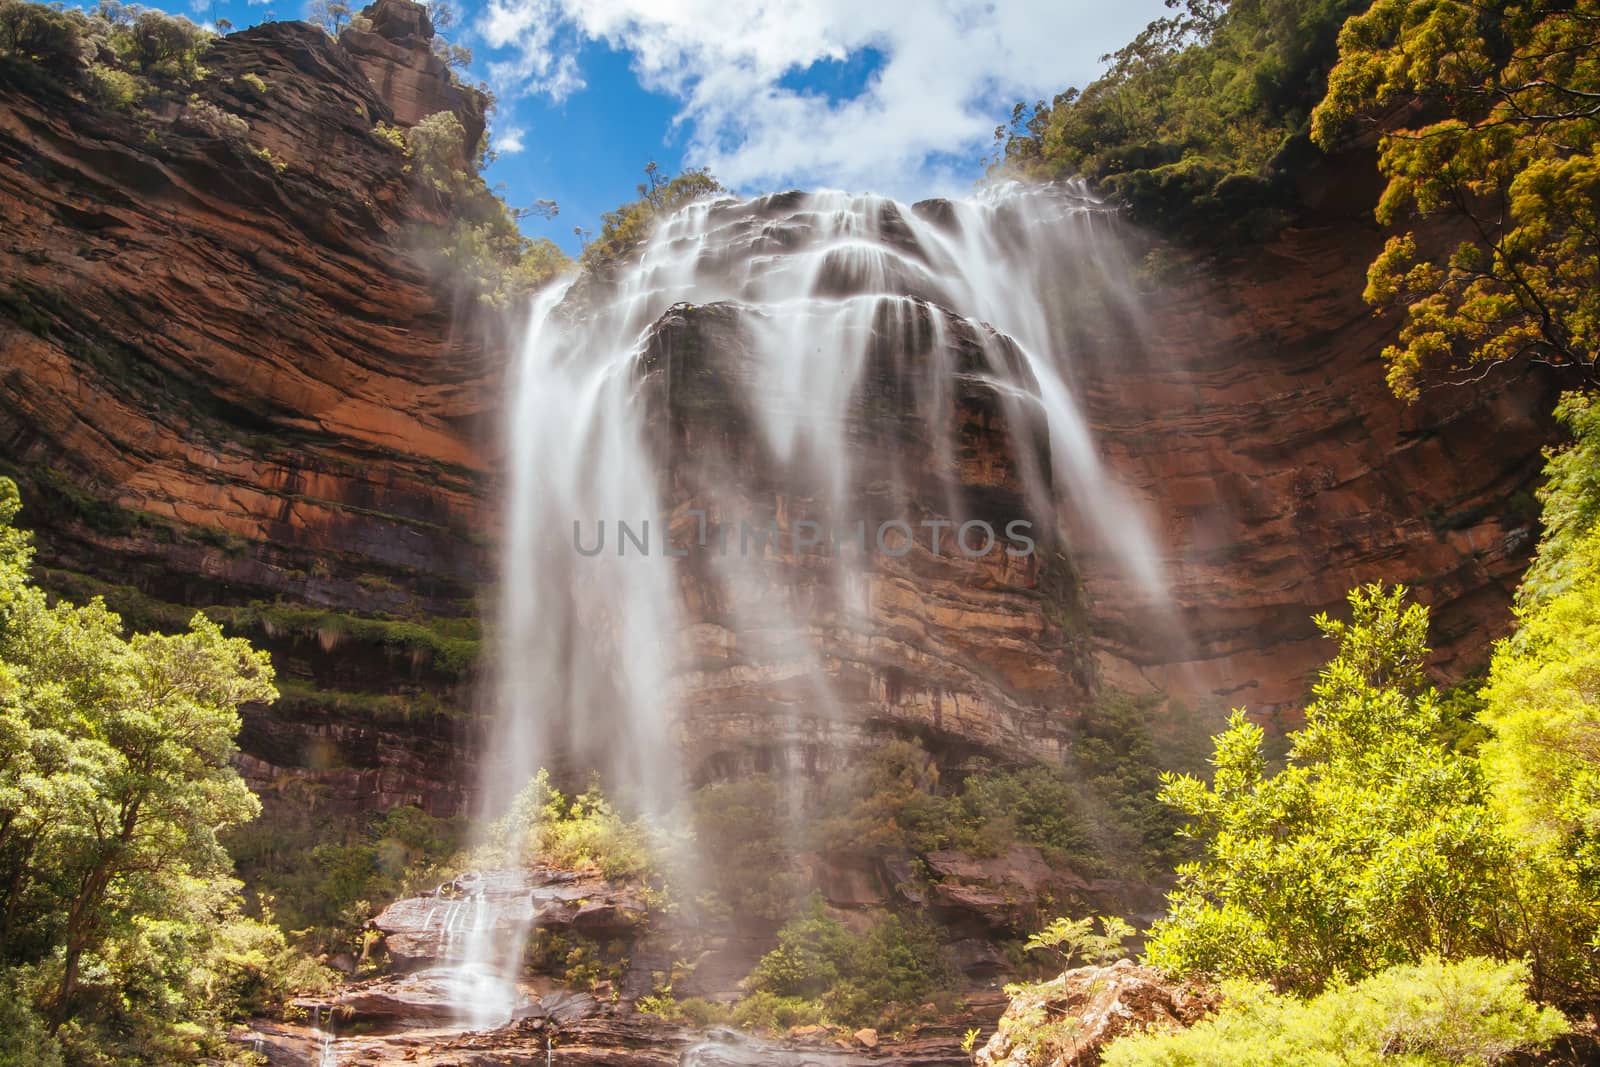 Waterfalls cascading over rocks in Wentworth Falls, New South Wales, Australia